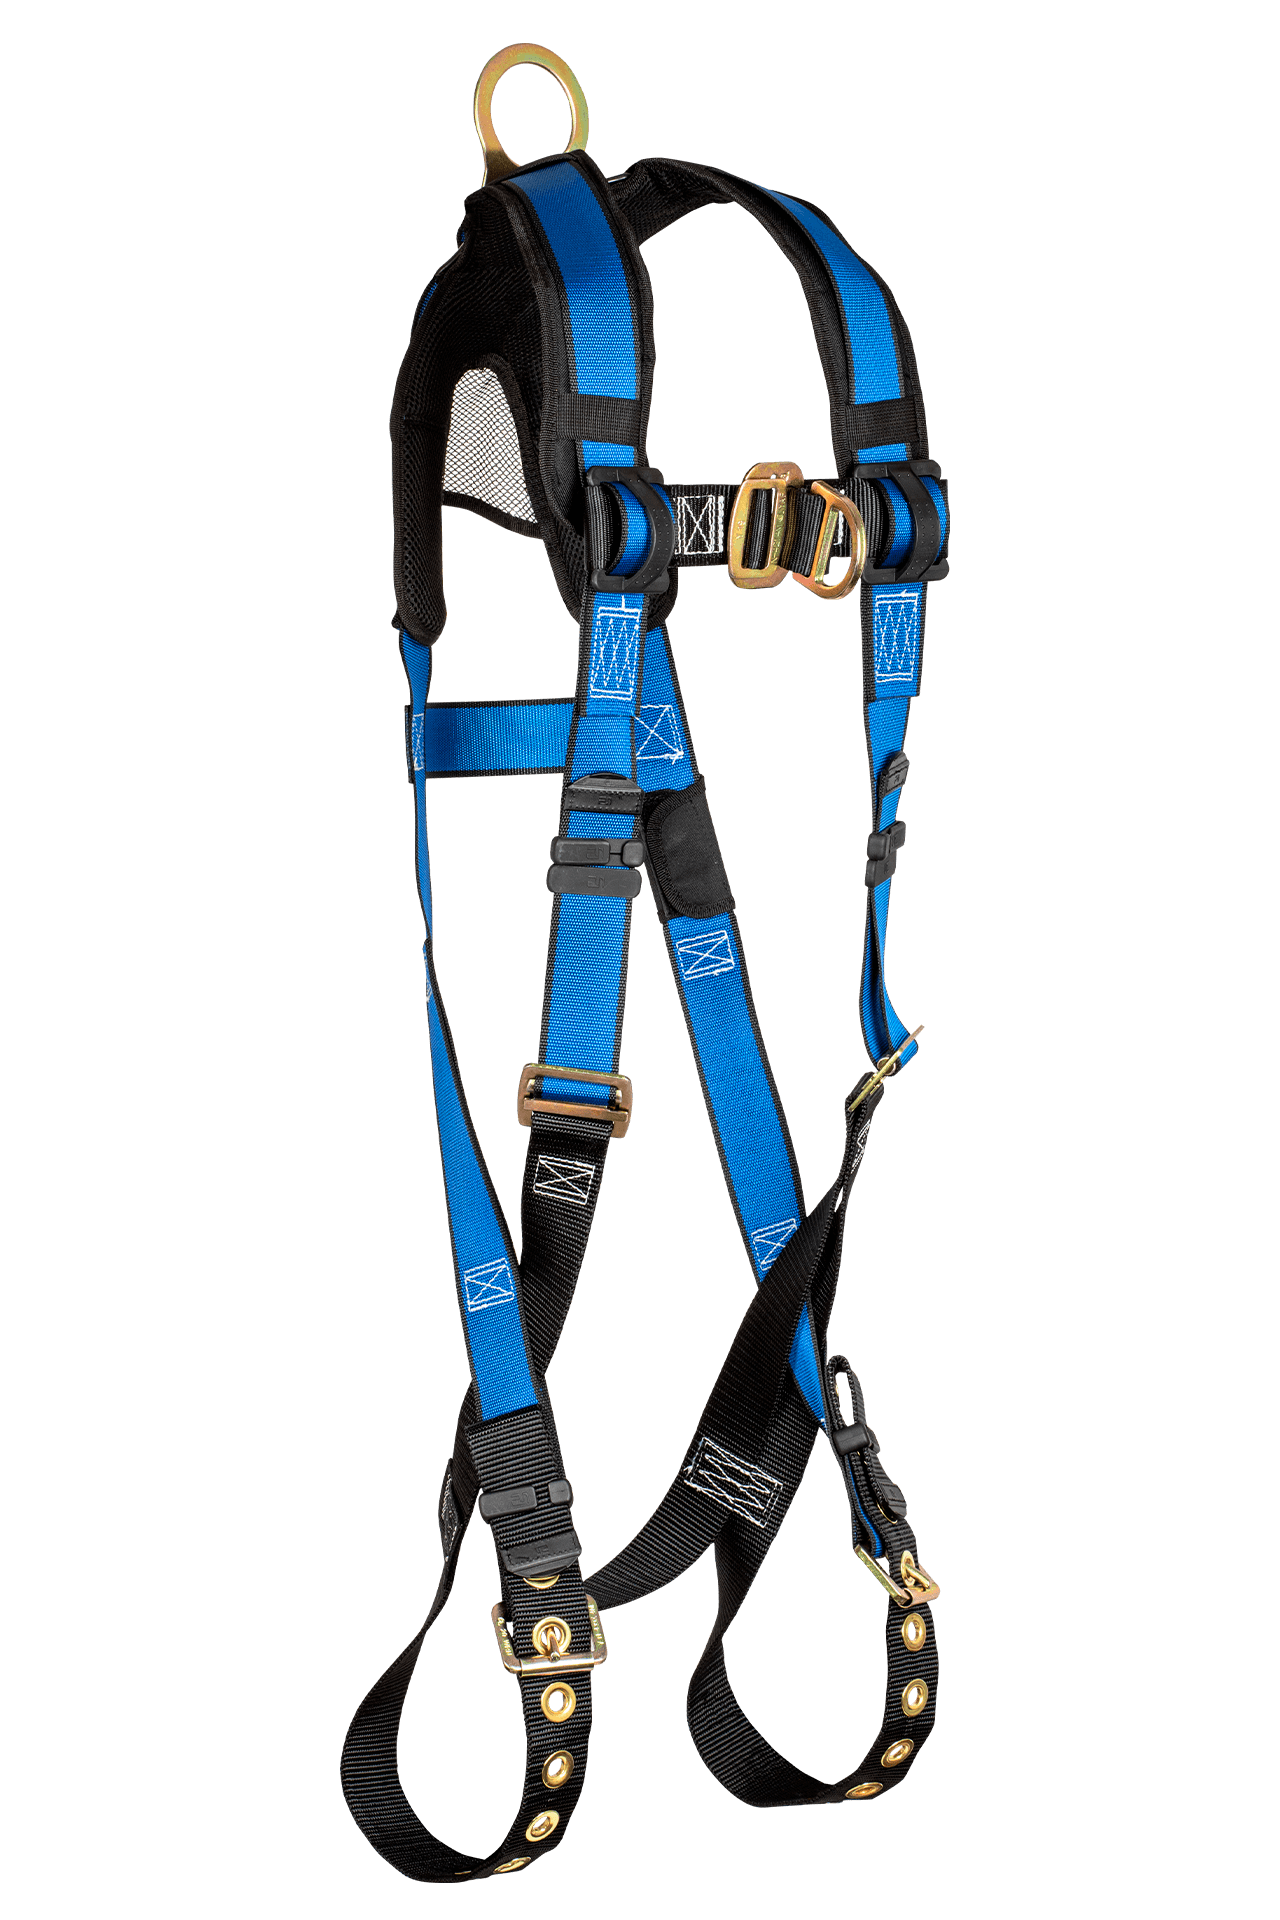 FallTech Contractor Plus 1 D-Ring Non-Belted Harness from Columbia Safety